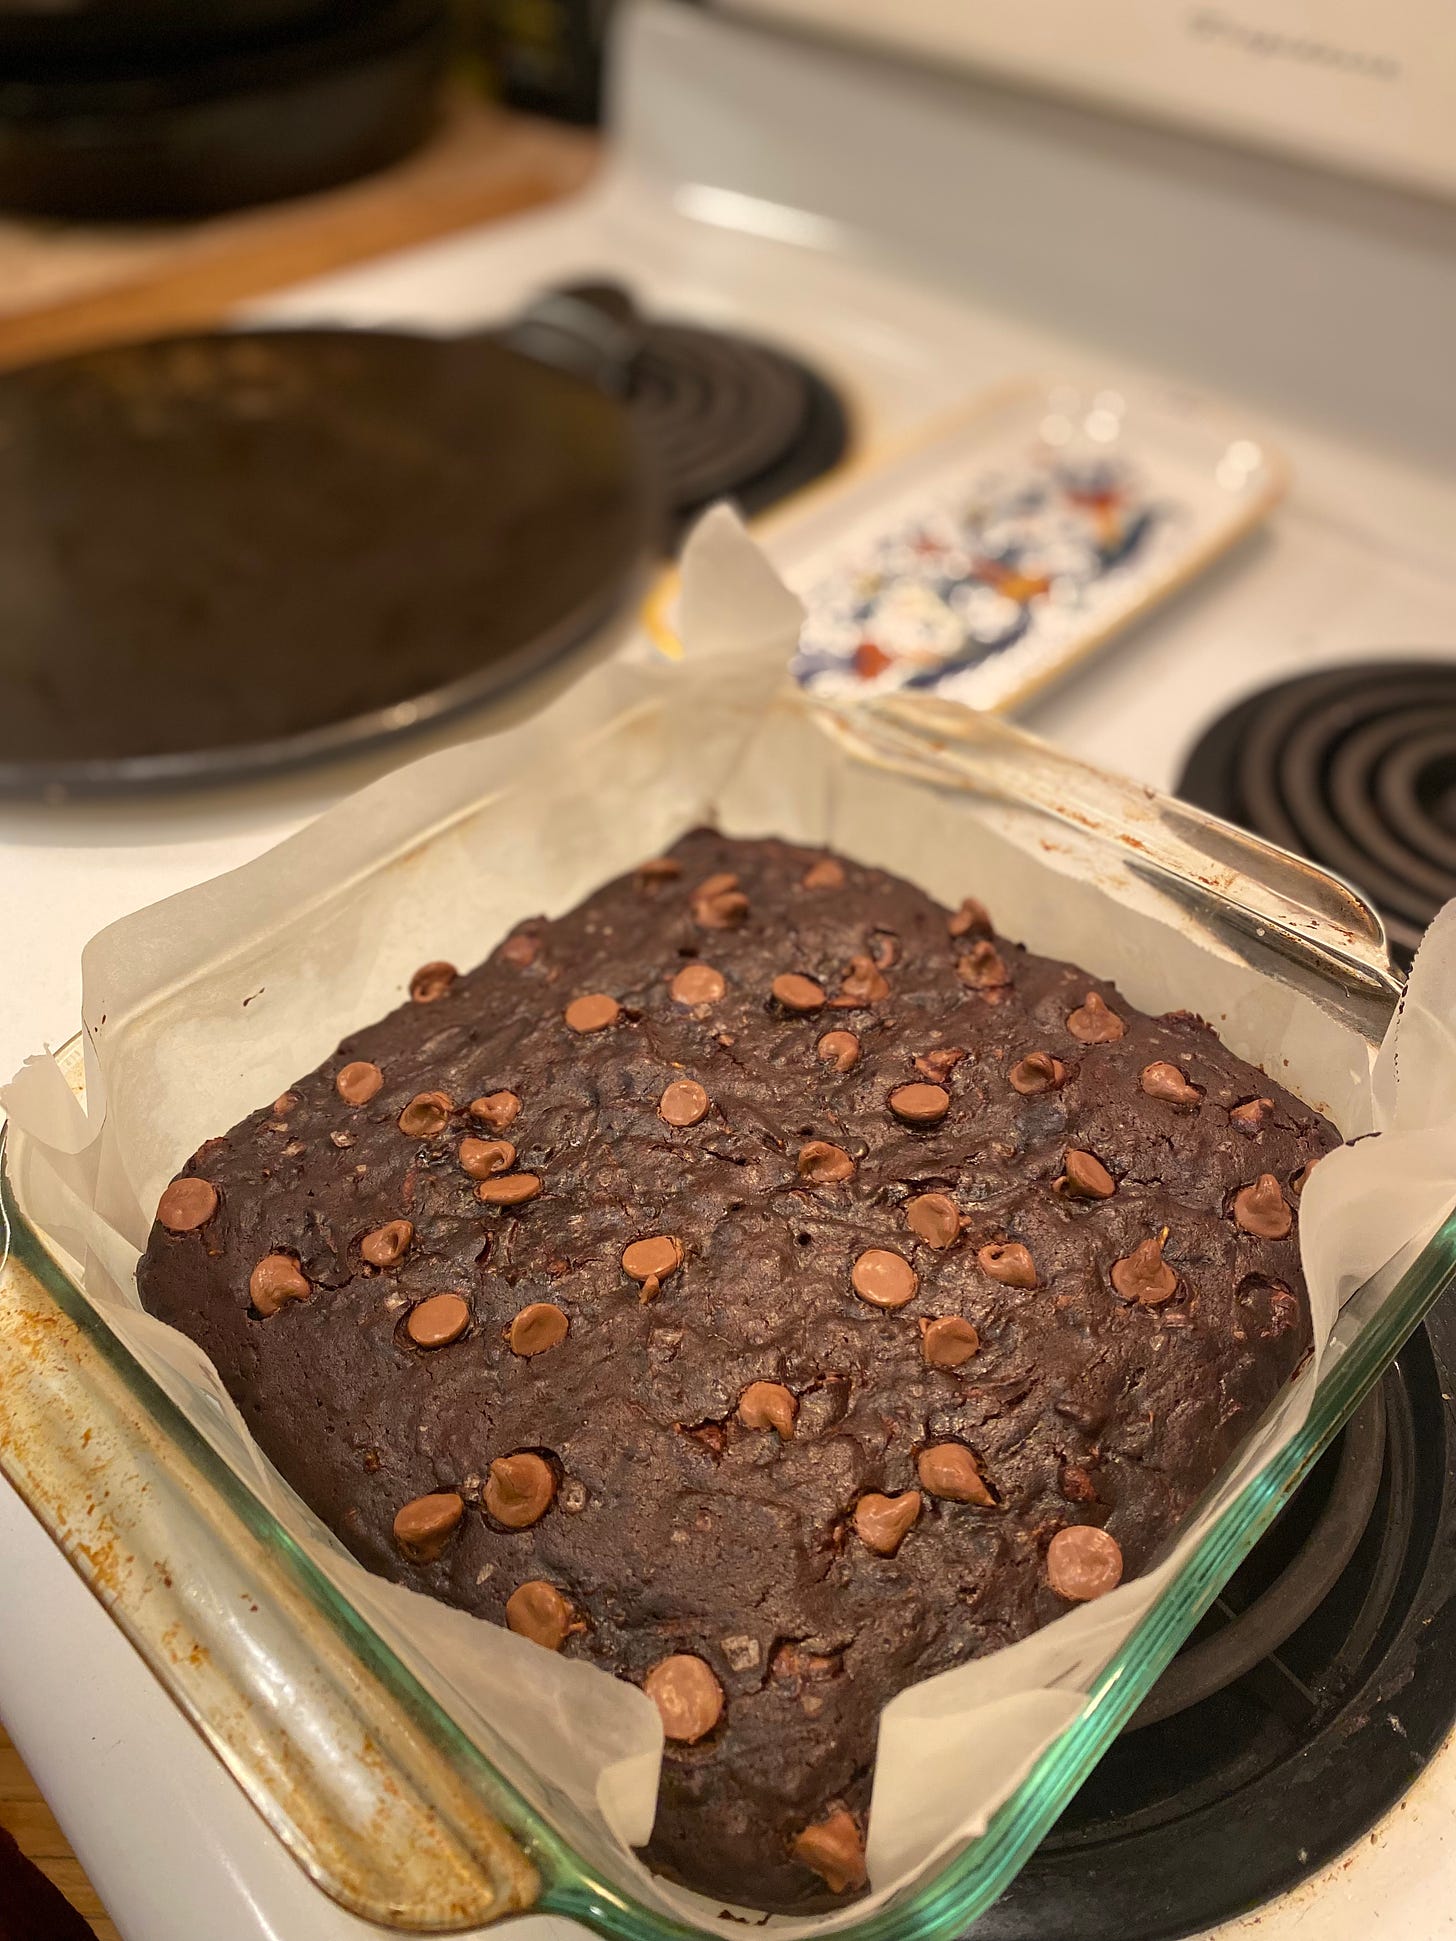 On top of the stove, a square glass baking dish lined with parchment, holding dark brownies dotted with milk chocolate chips.